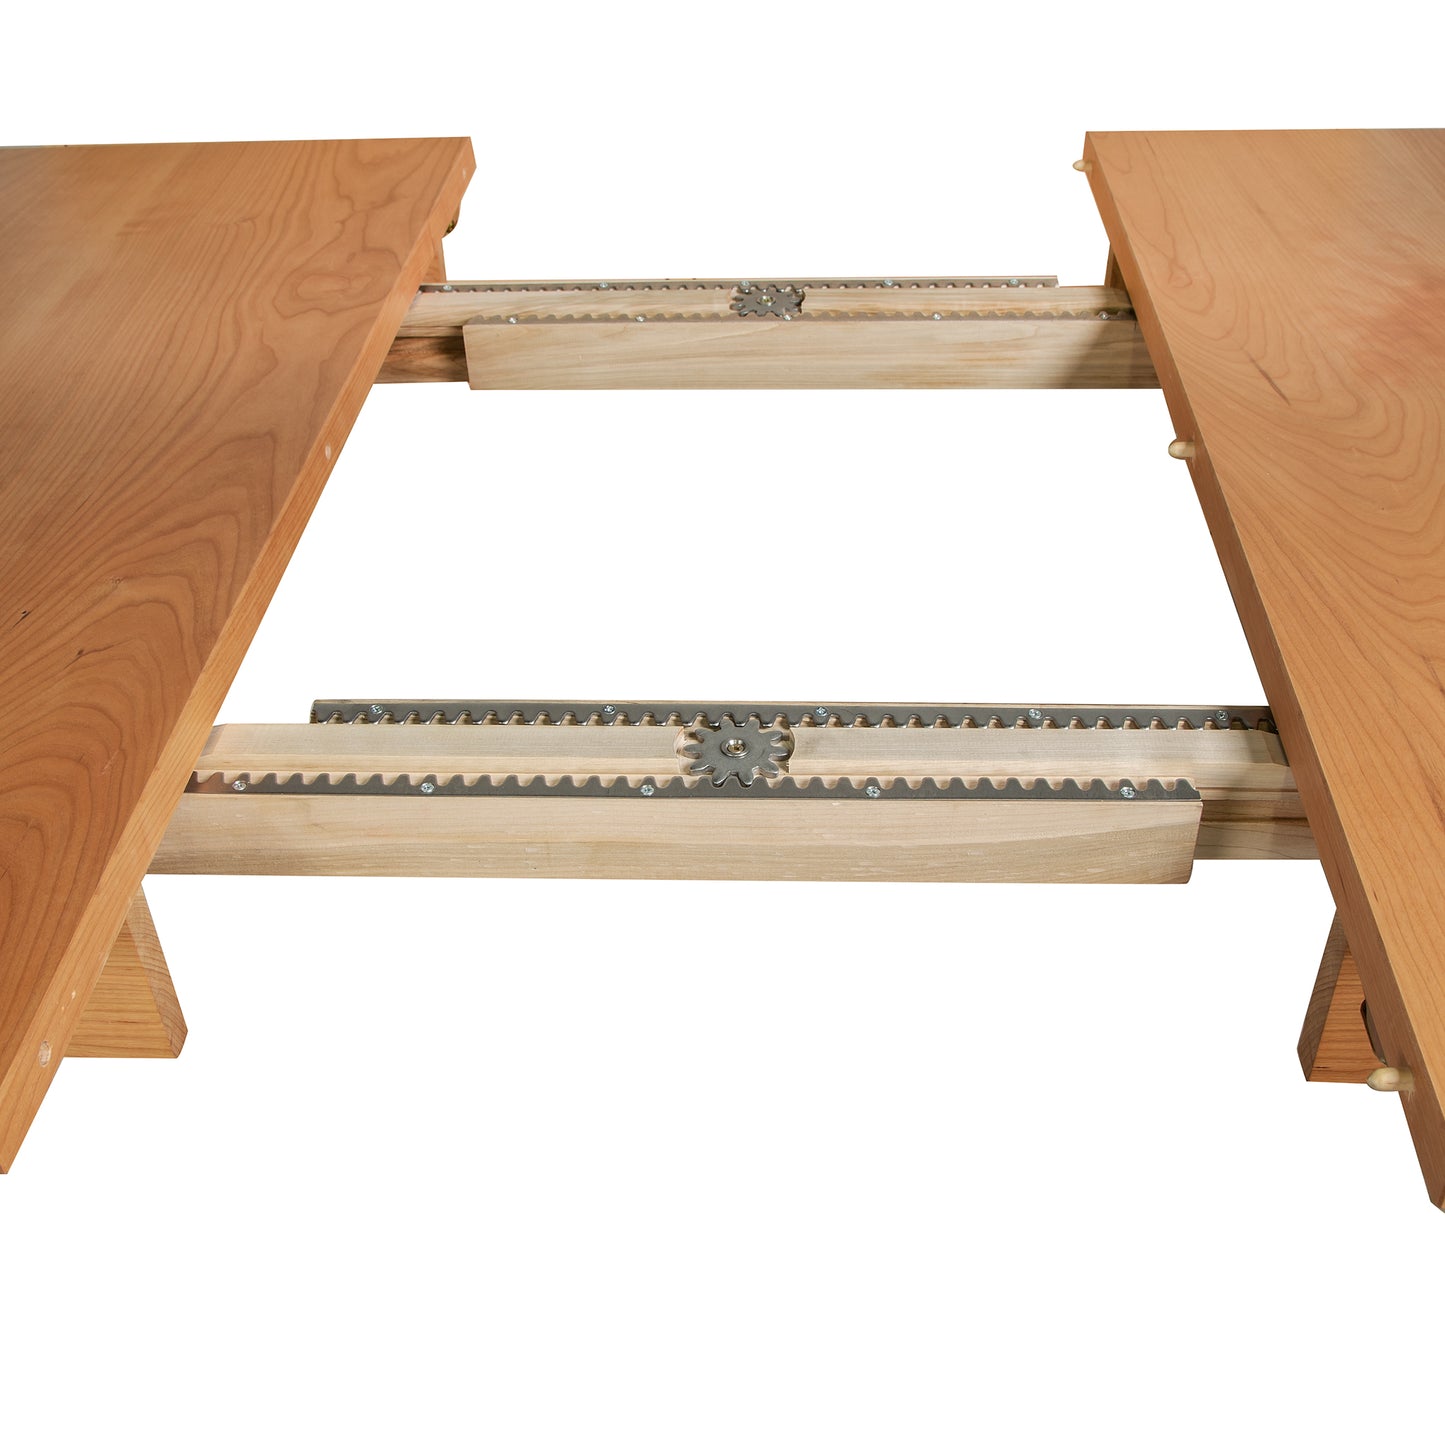 Close-up view of the extendable mechanism of a Maple Corner Woodworks Vermont Shaker Rectangular Extension Dining Table, showing wooden planks and a metallic cog and gear system on a neutral background.